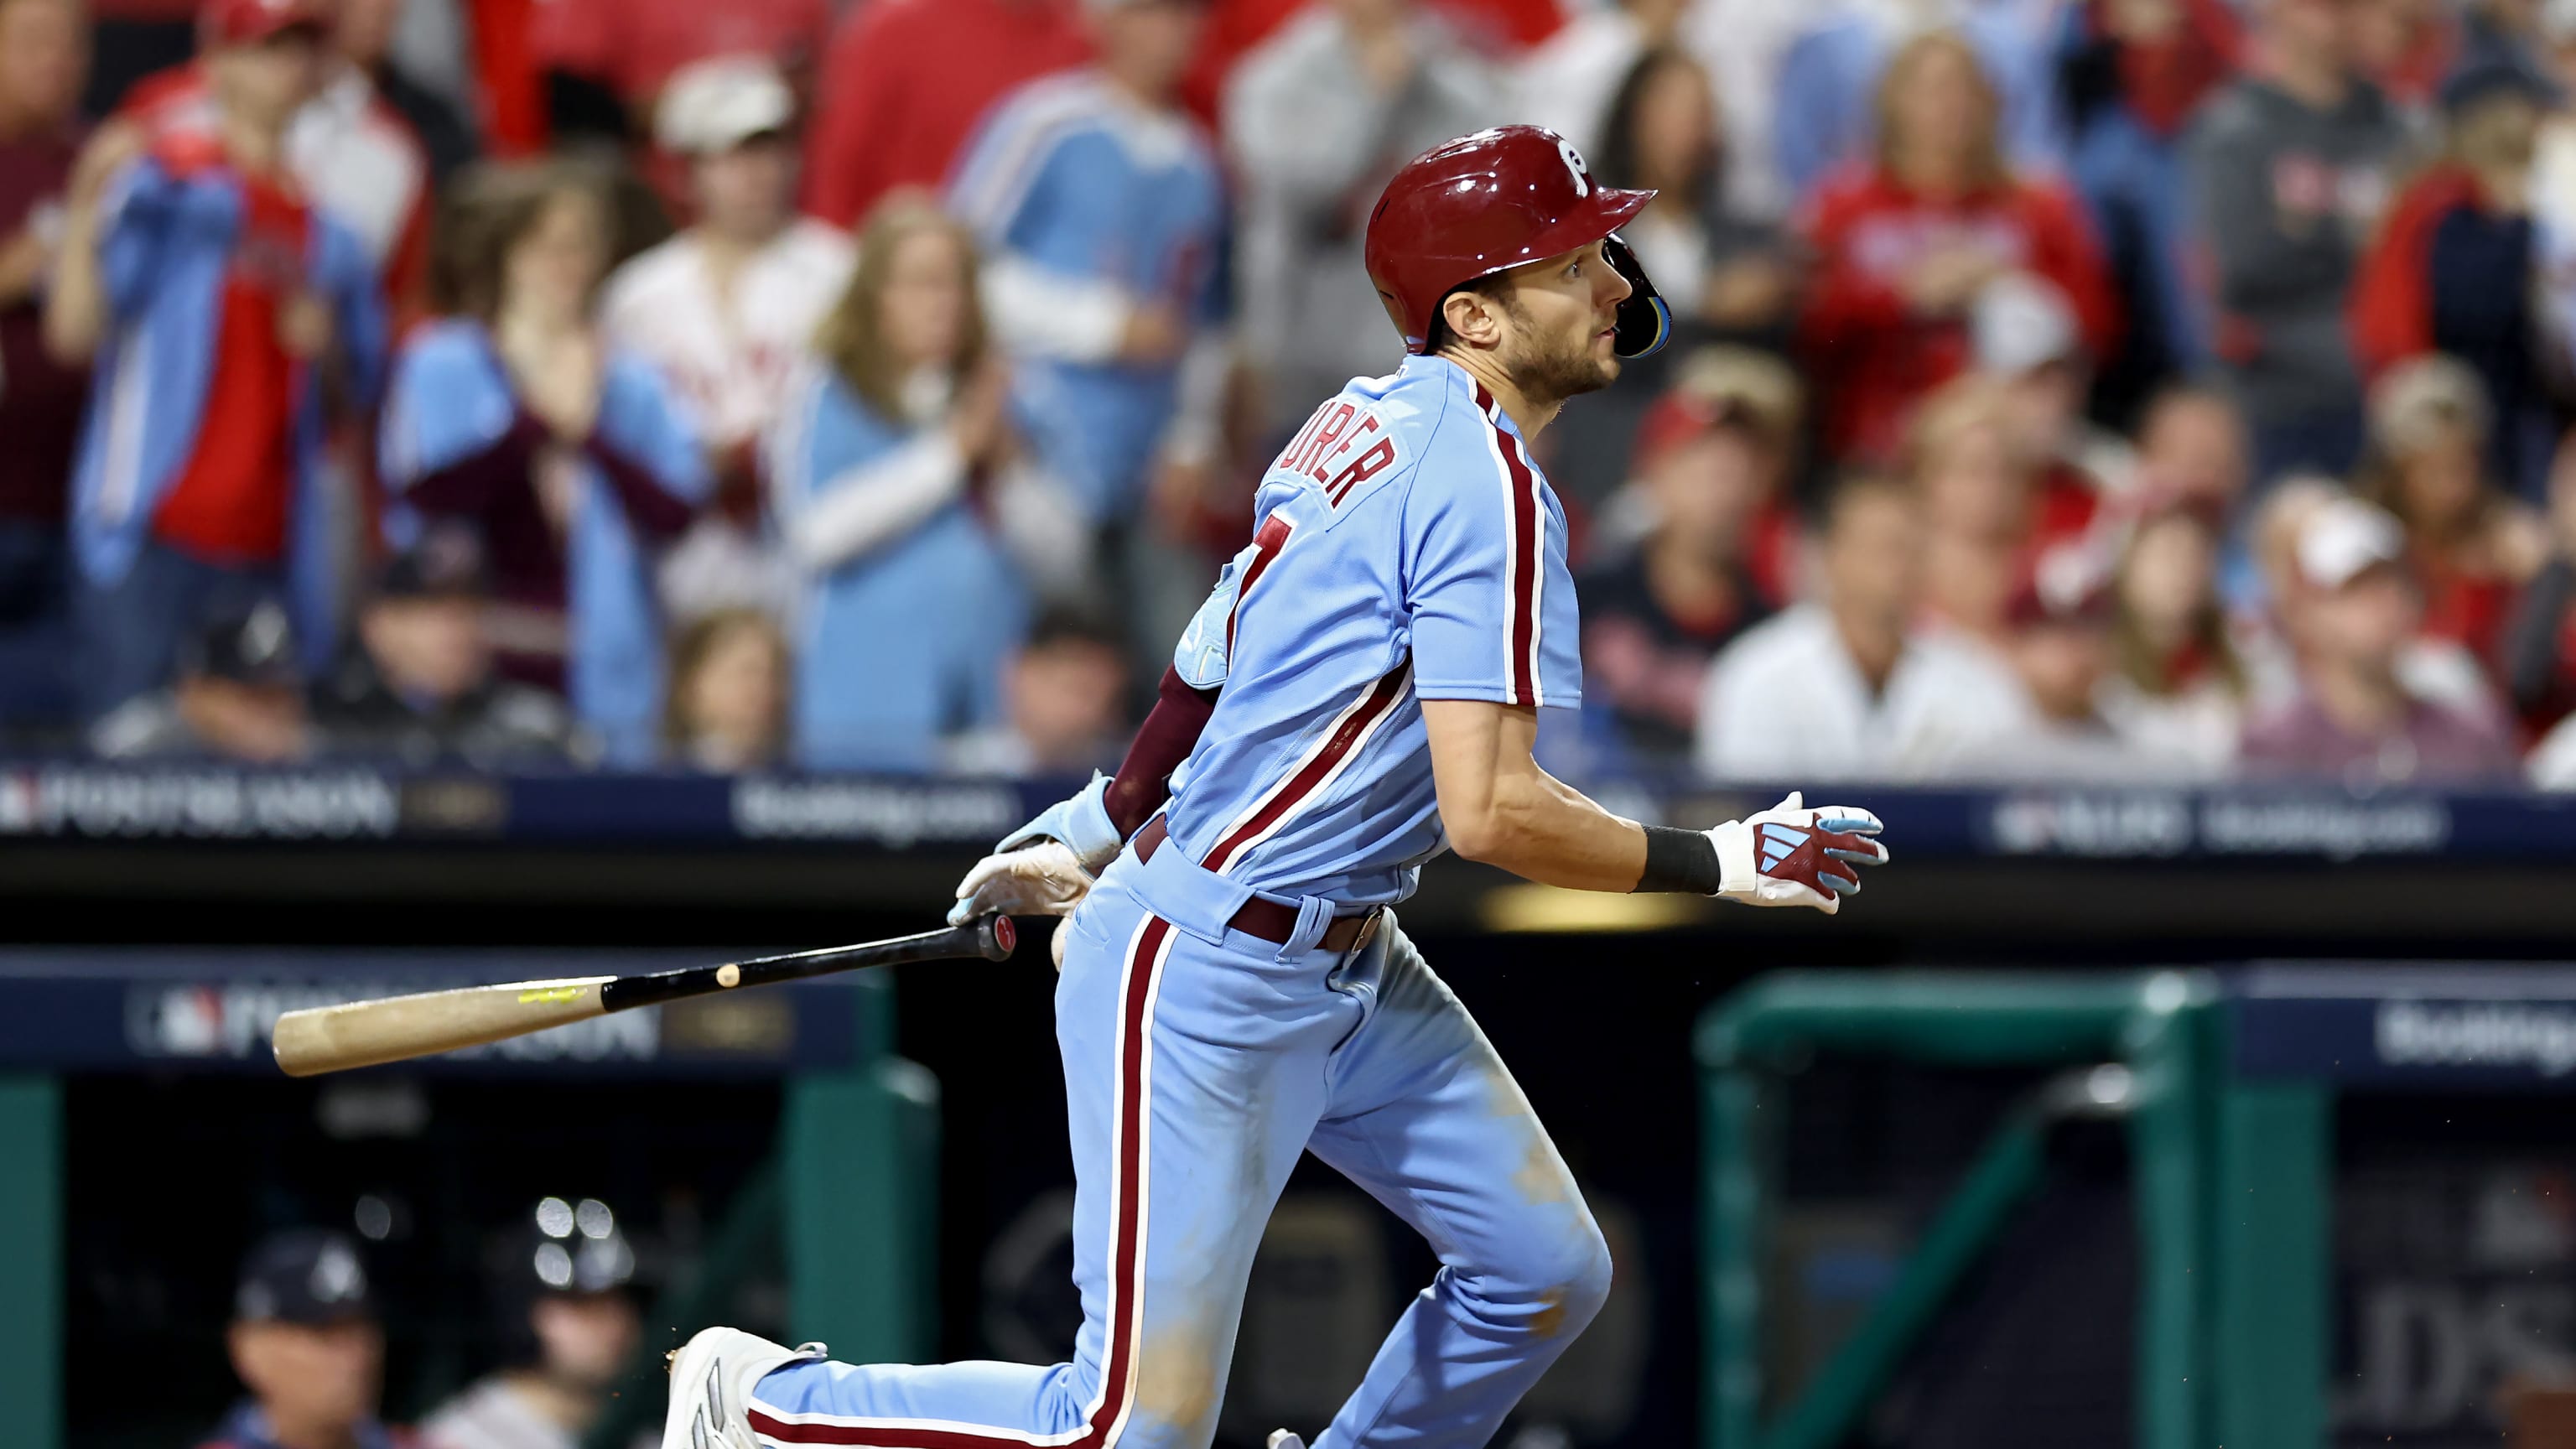 Watch: Trea Turner ties game with improbable ninth-inning home run   Phillies Nation - Your source for Philadelphia Phillies news, opinion,  history, rumors, events, and other fun stuff.